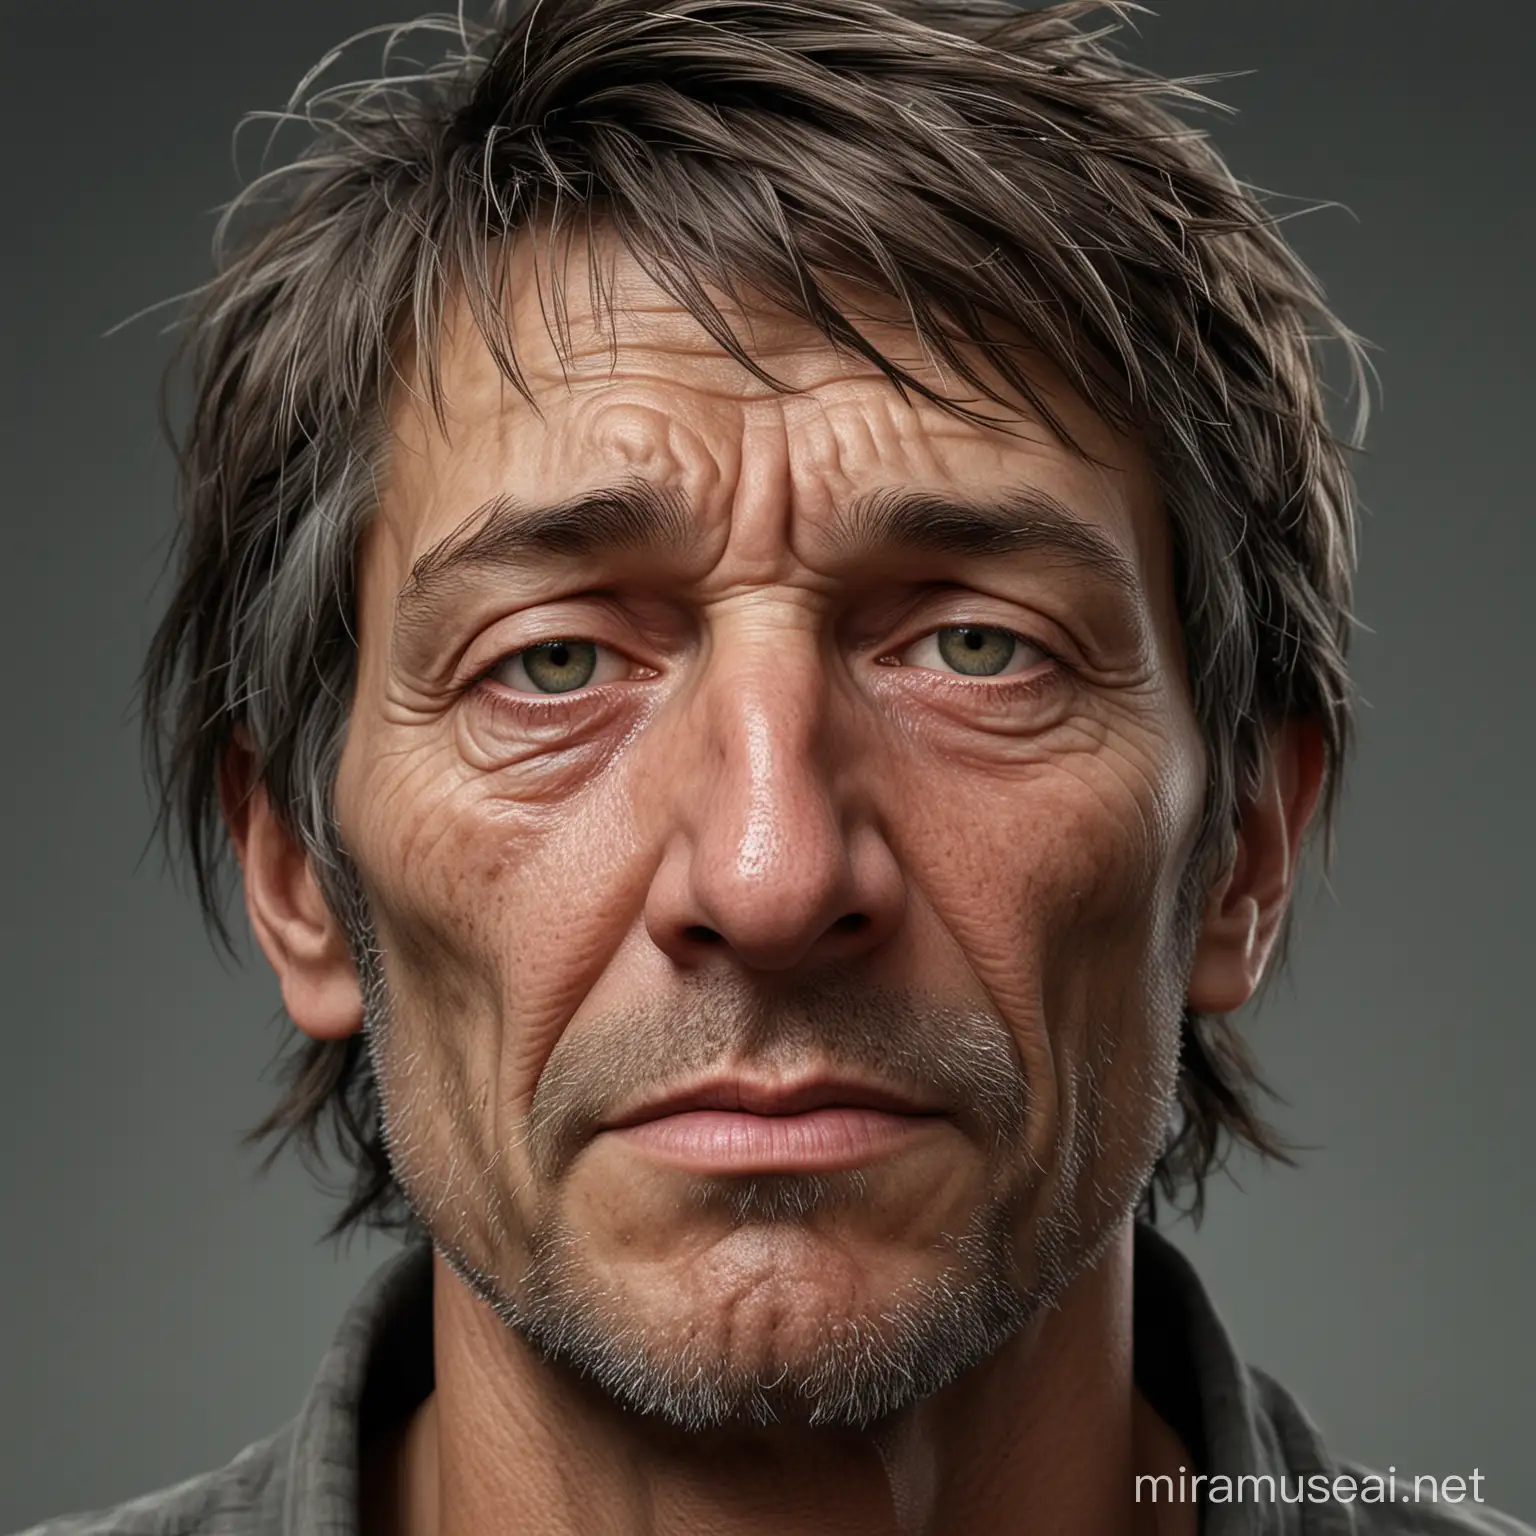 Realistic Portrait of a Sad and Homeless Man with Wrinkles